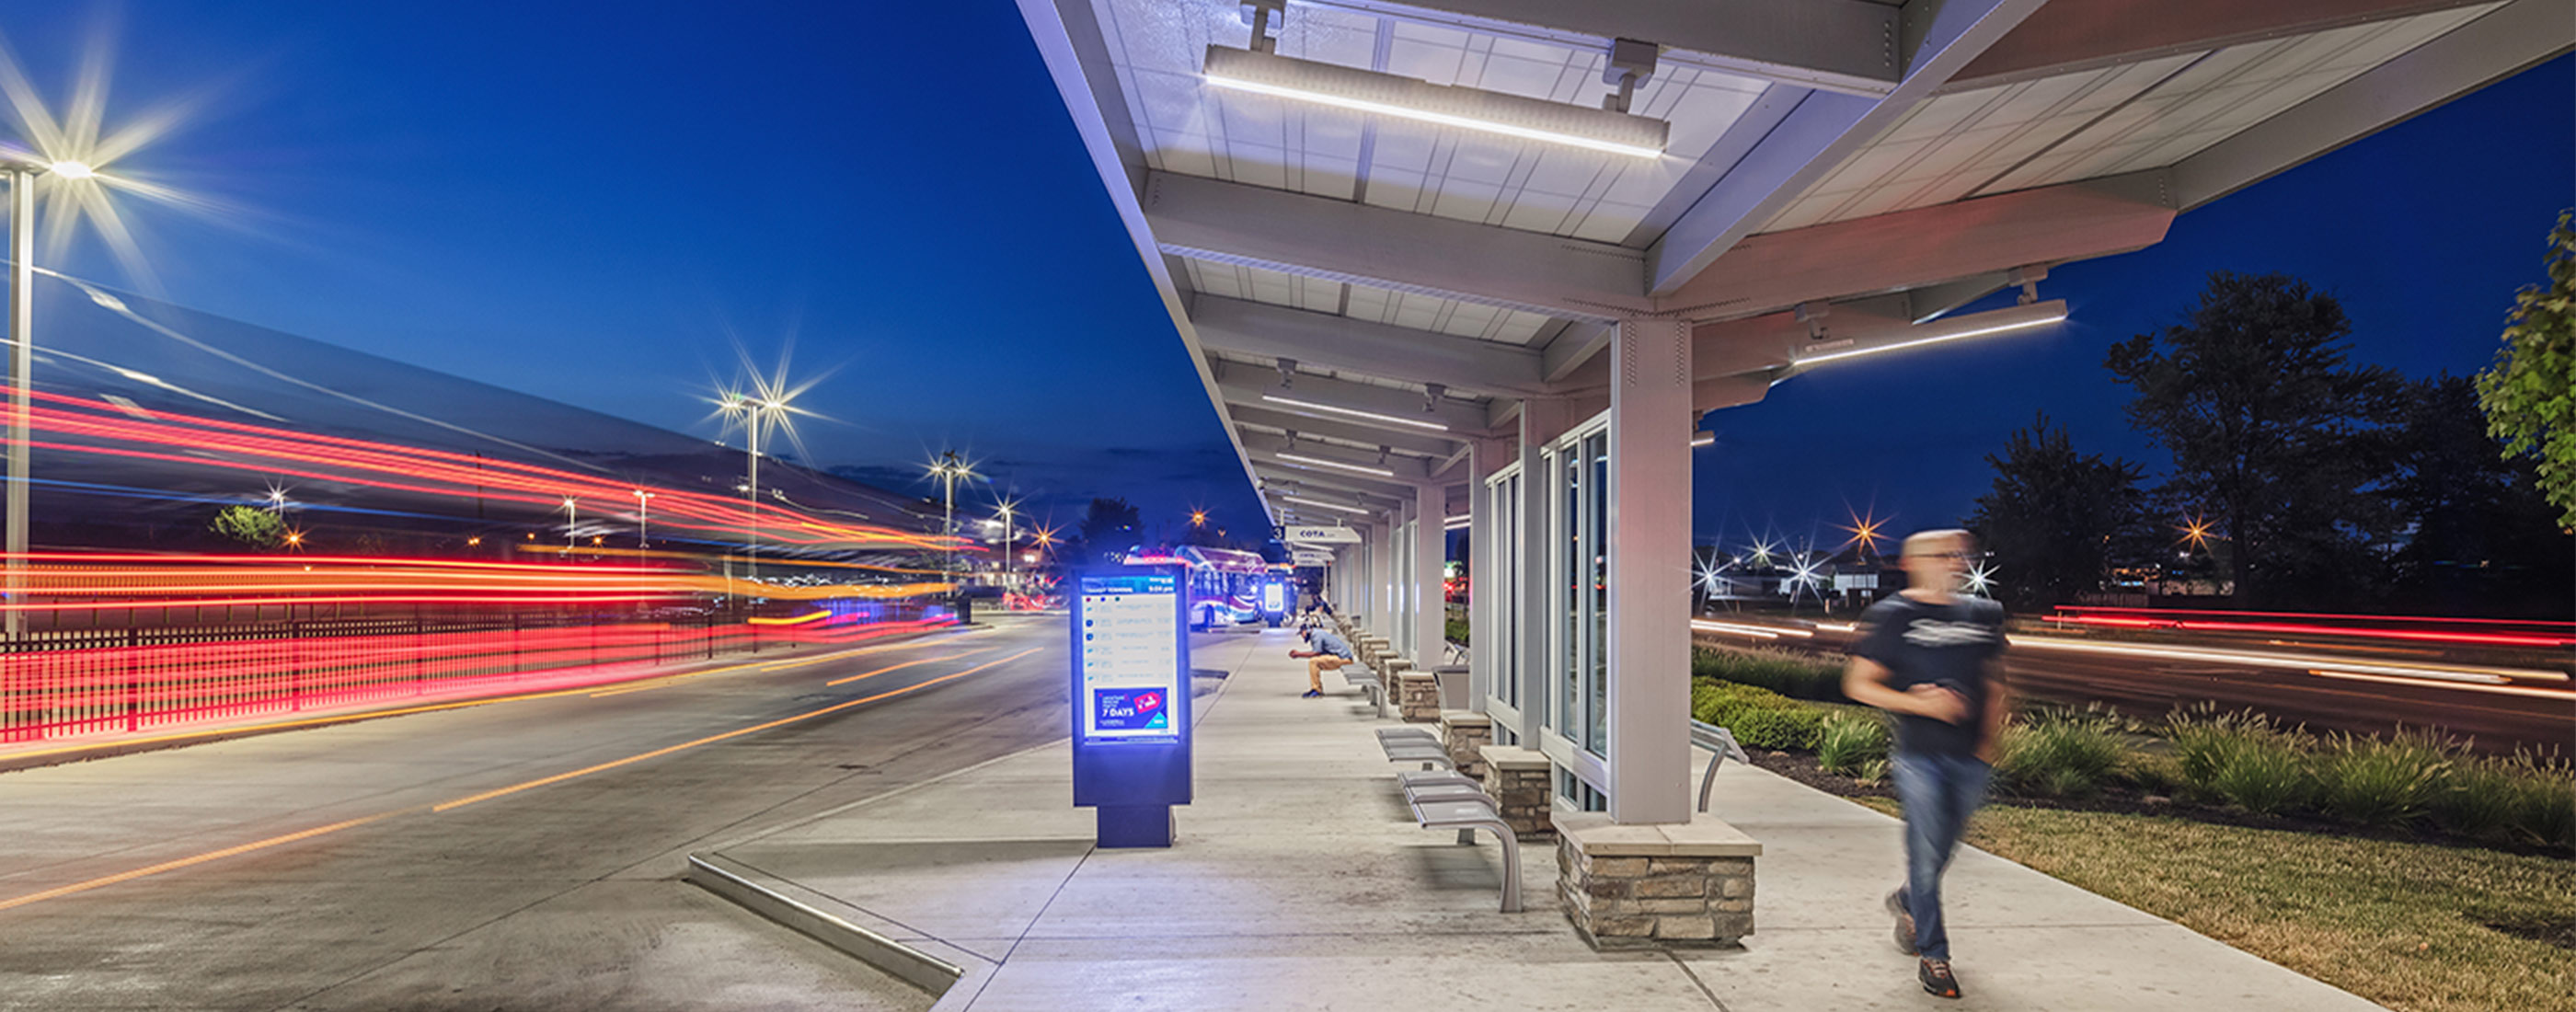 A nighttime view of COTA's bus rapid transit line.